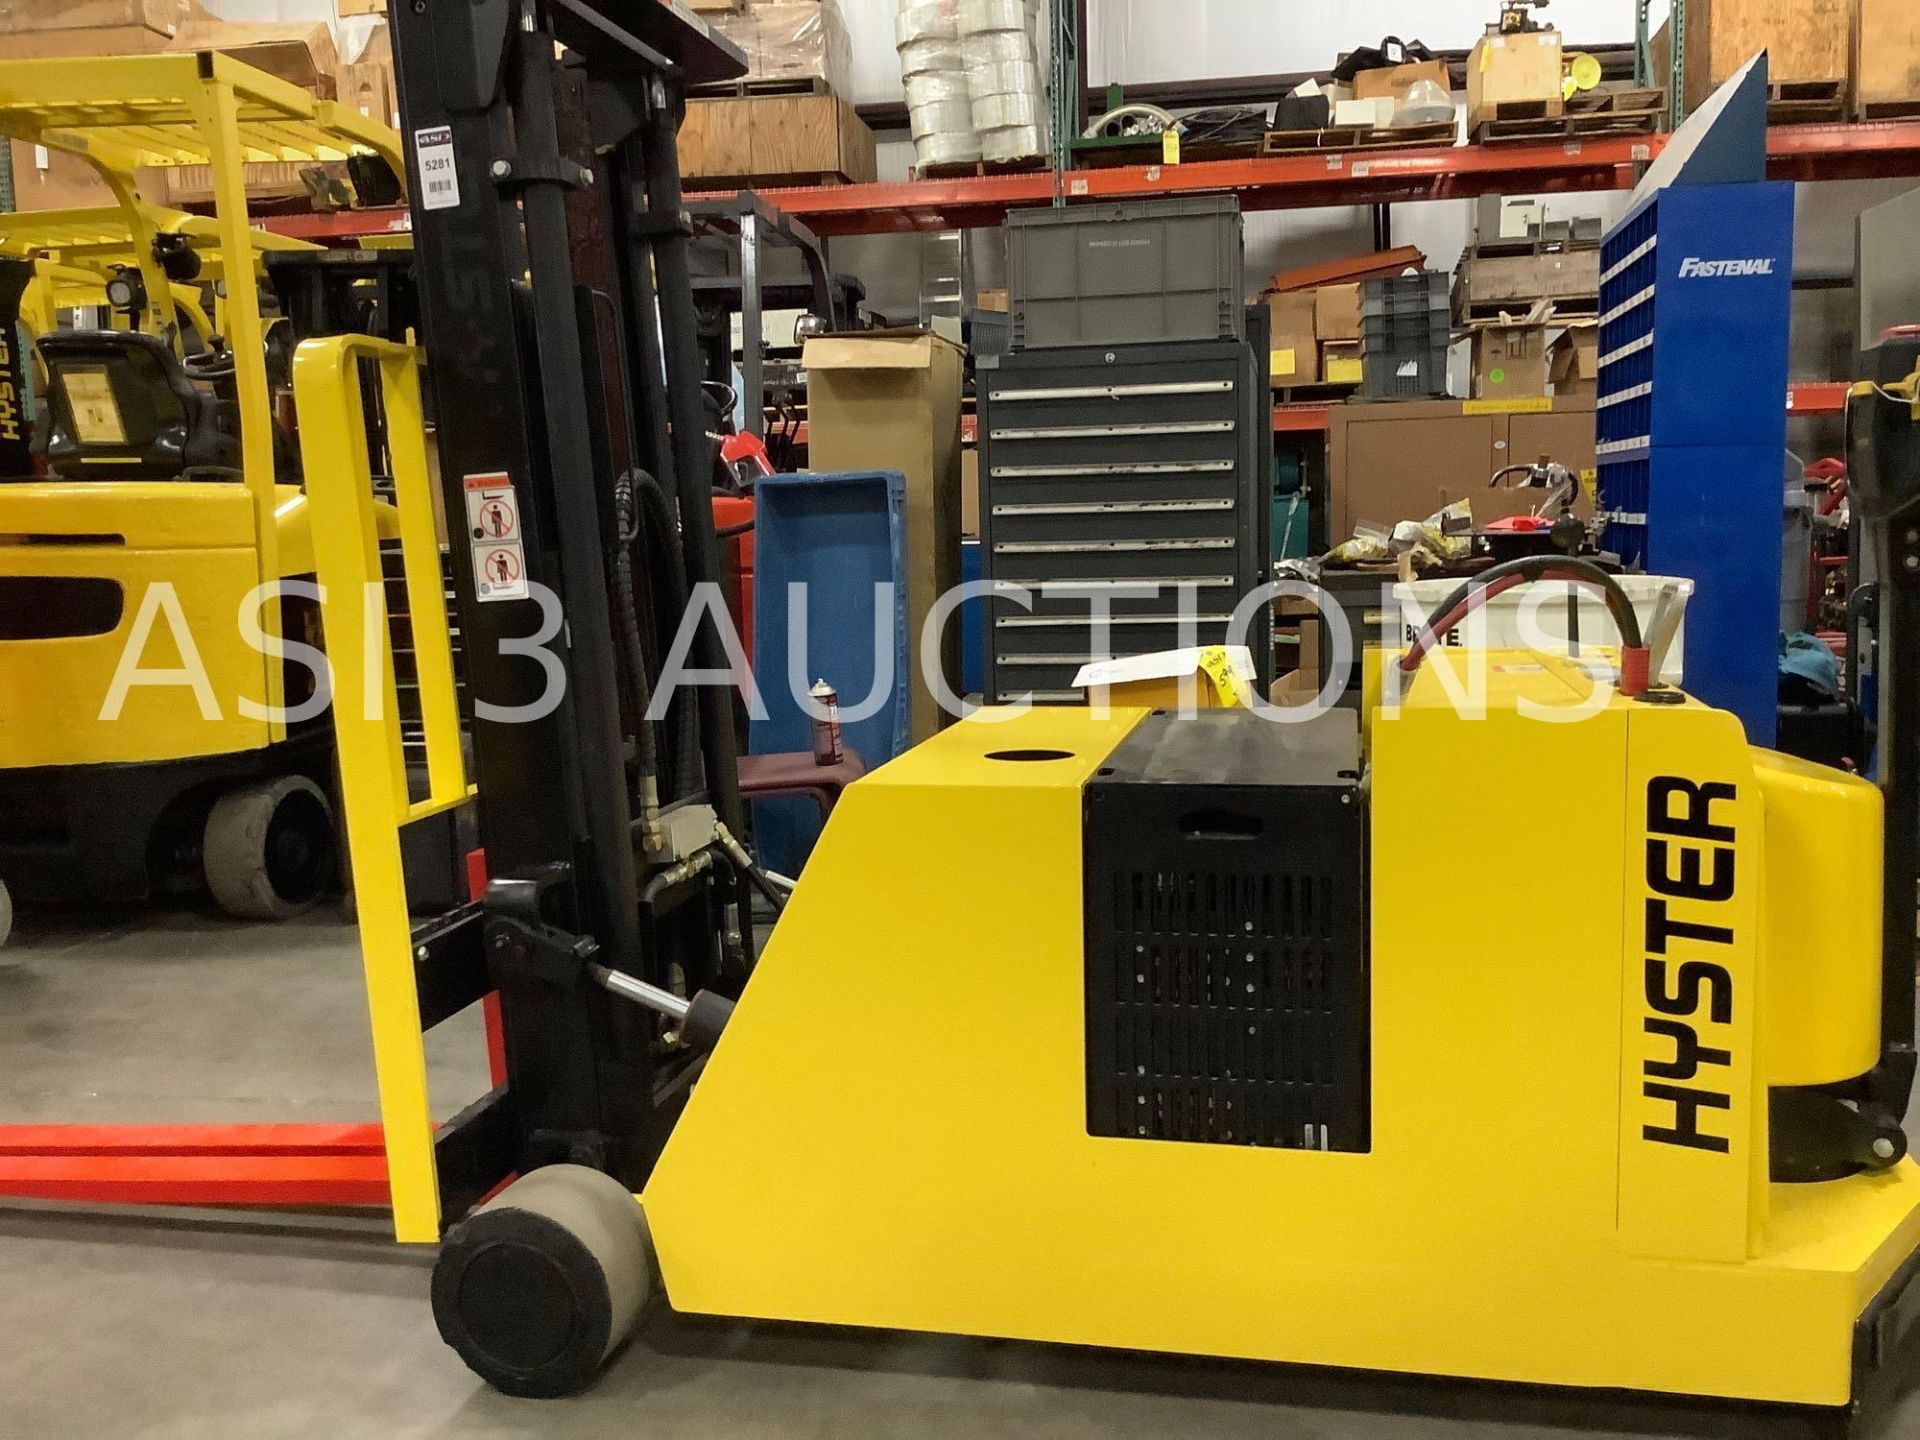 HYSTER FORK LIFT TILT TRUCK MODEL W40XTC MAX CAPACITY 4000lbs LOAD HEIGHT 104.5 RUNS & OPERATES - Image 9 of 9